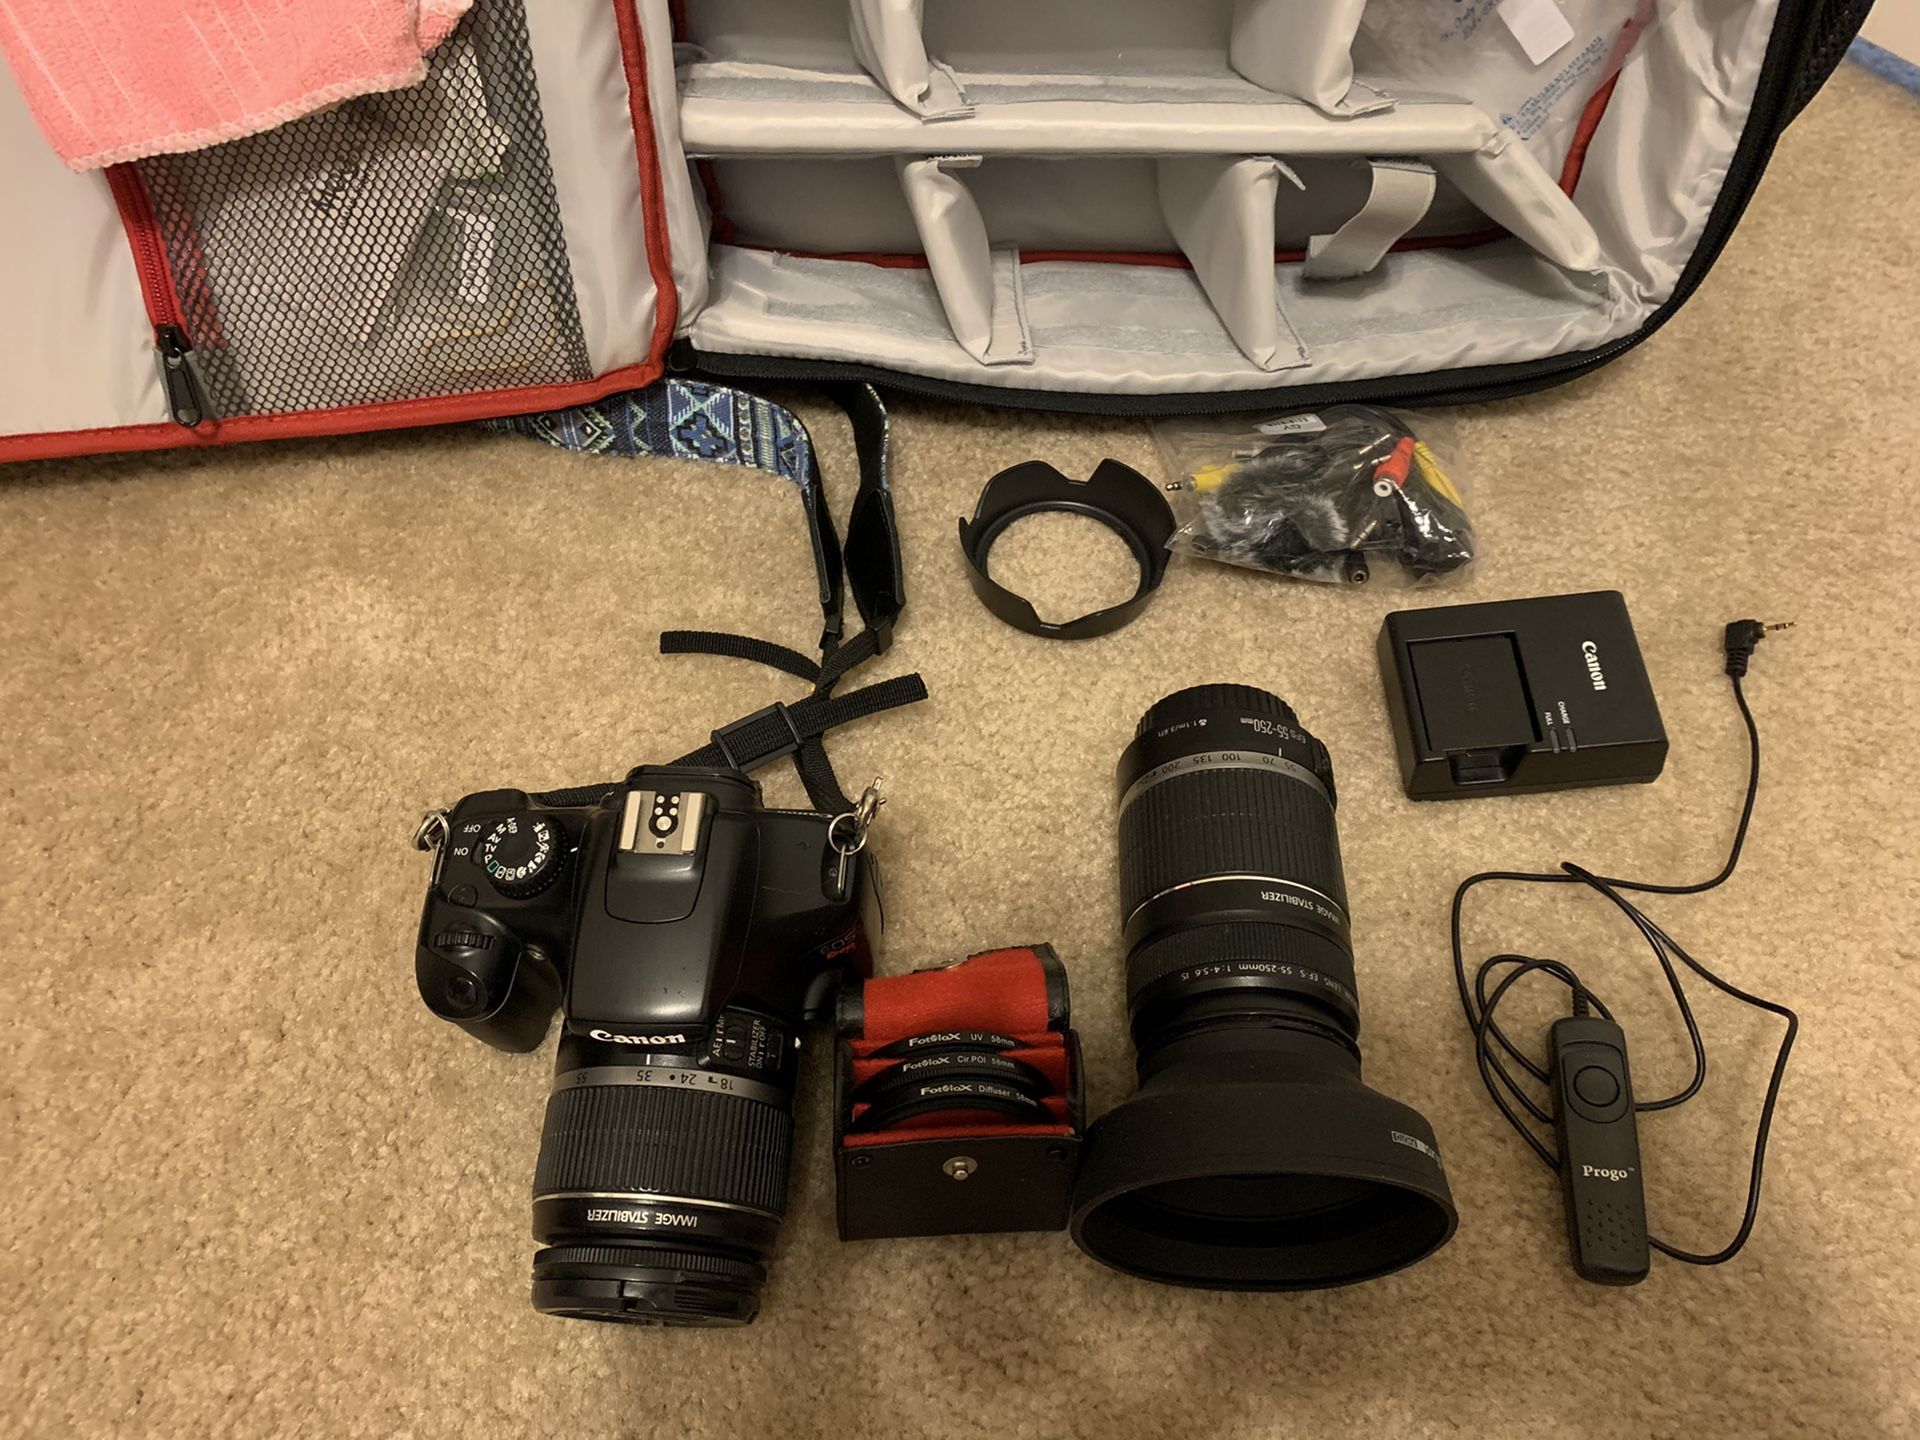 Cannon Rebel t3 DSLR w/ Zoom lens and accessories